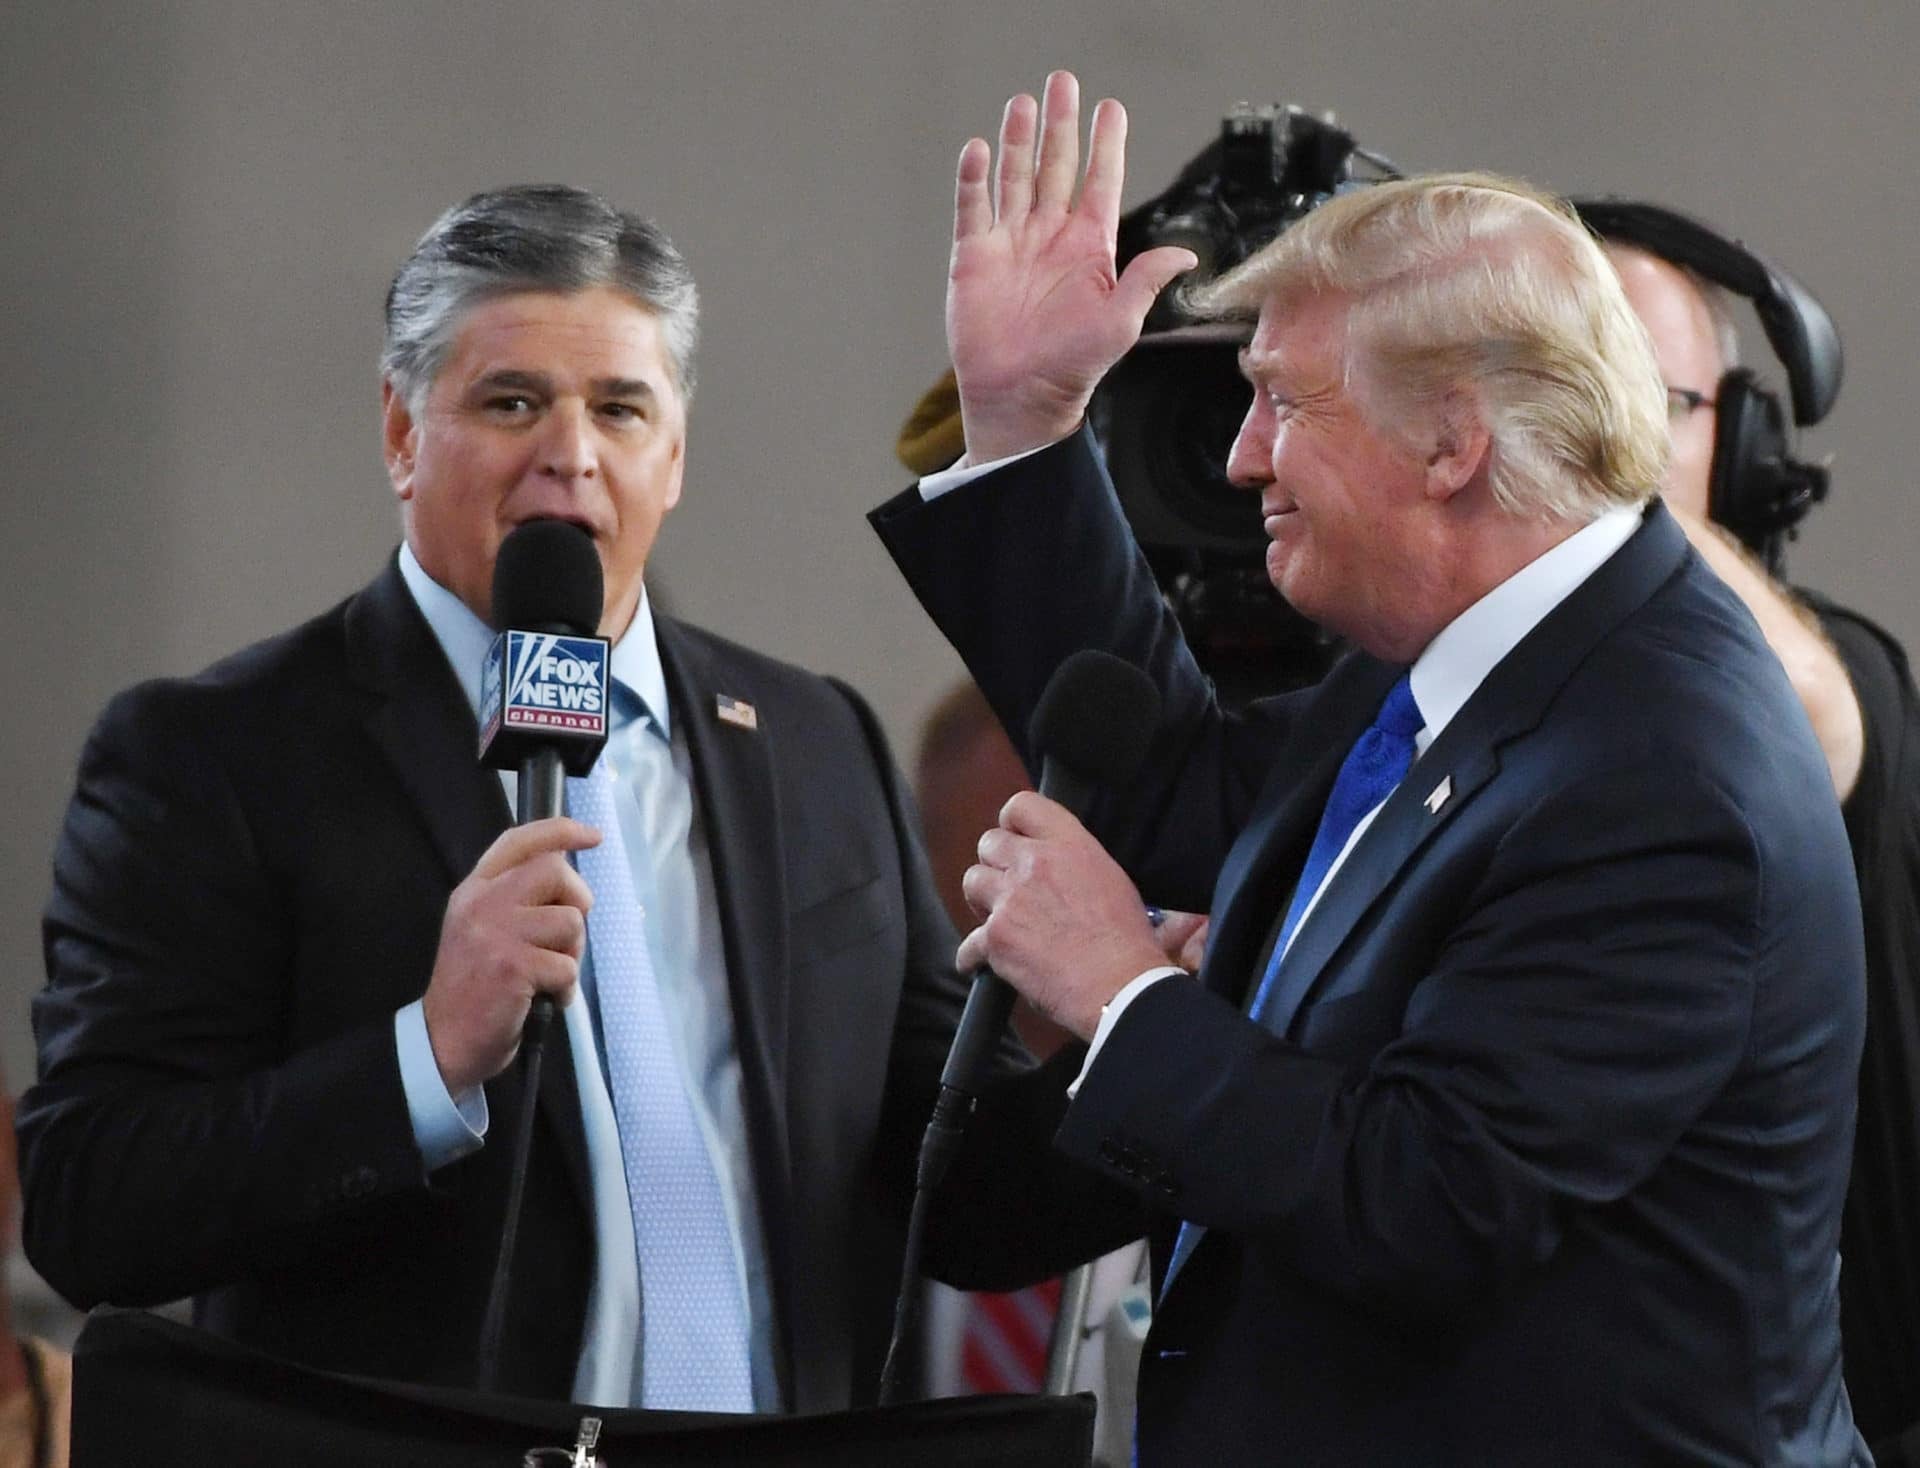 Fox News' Sean Hannity Said Was Covering Trump Rally For Live Show, And Then He Appeared On Stage